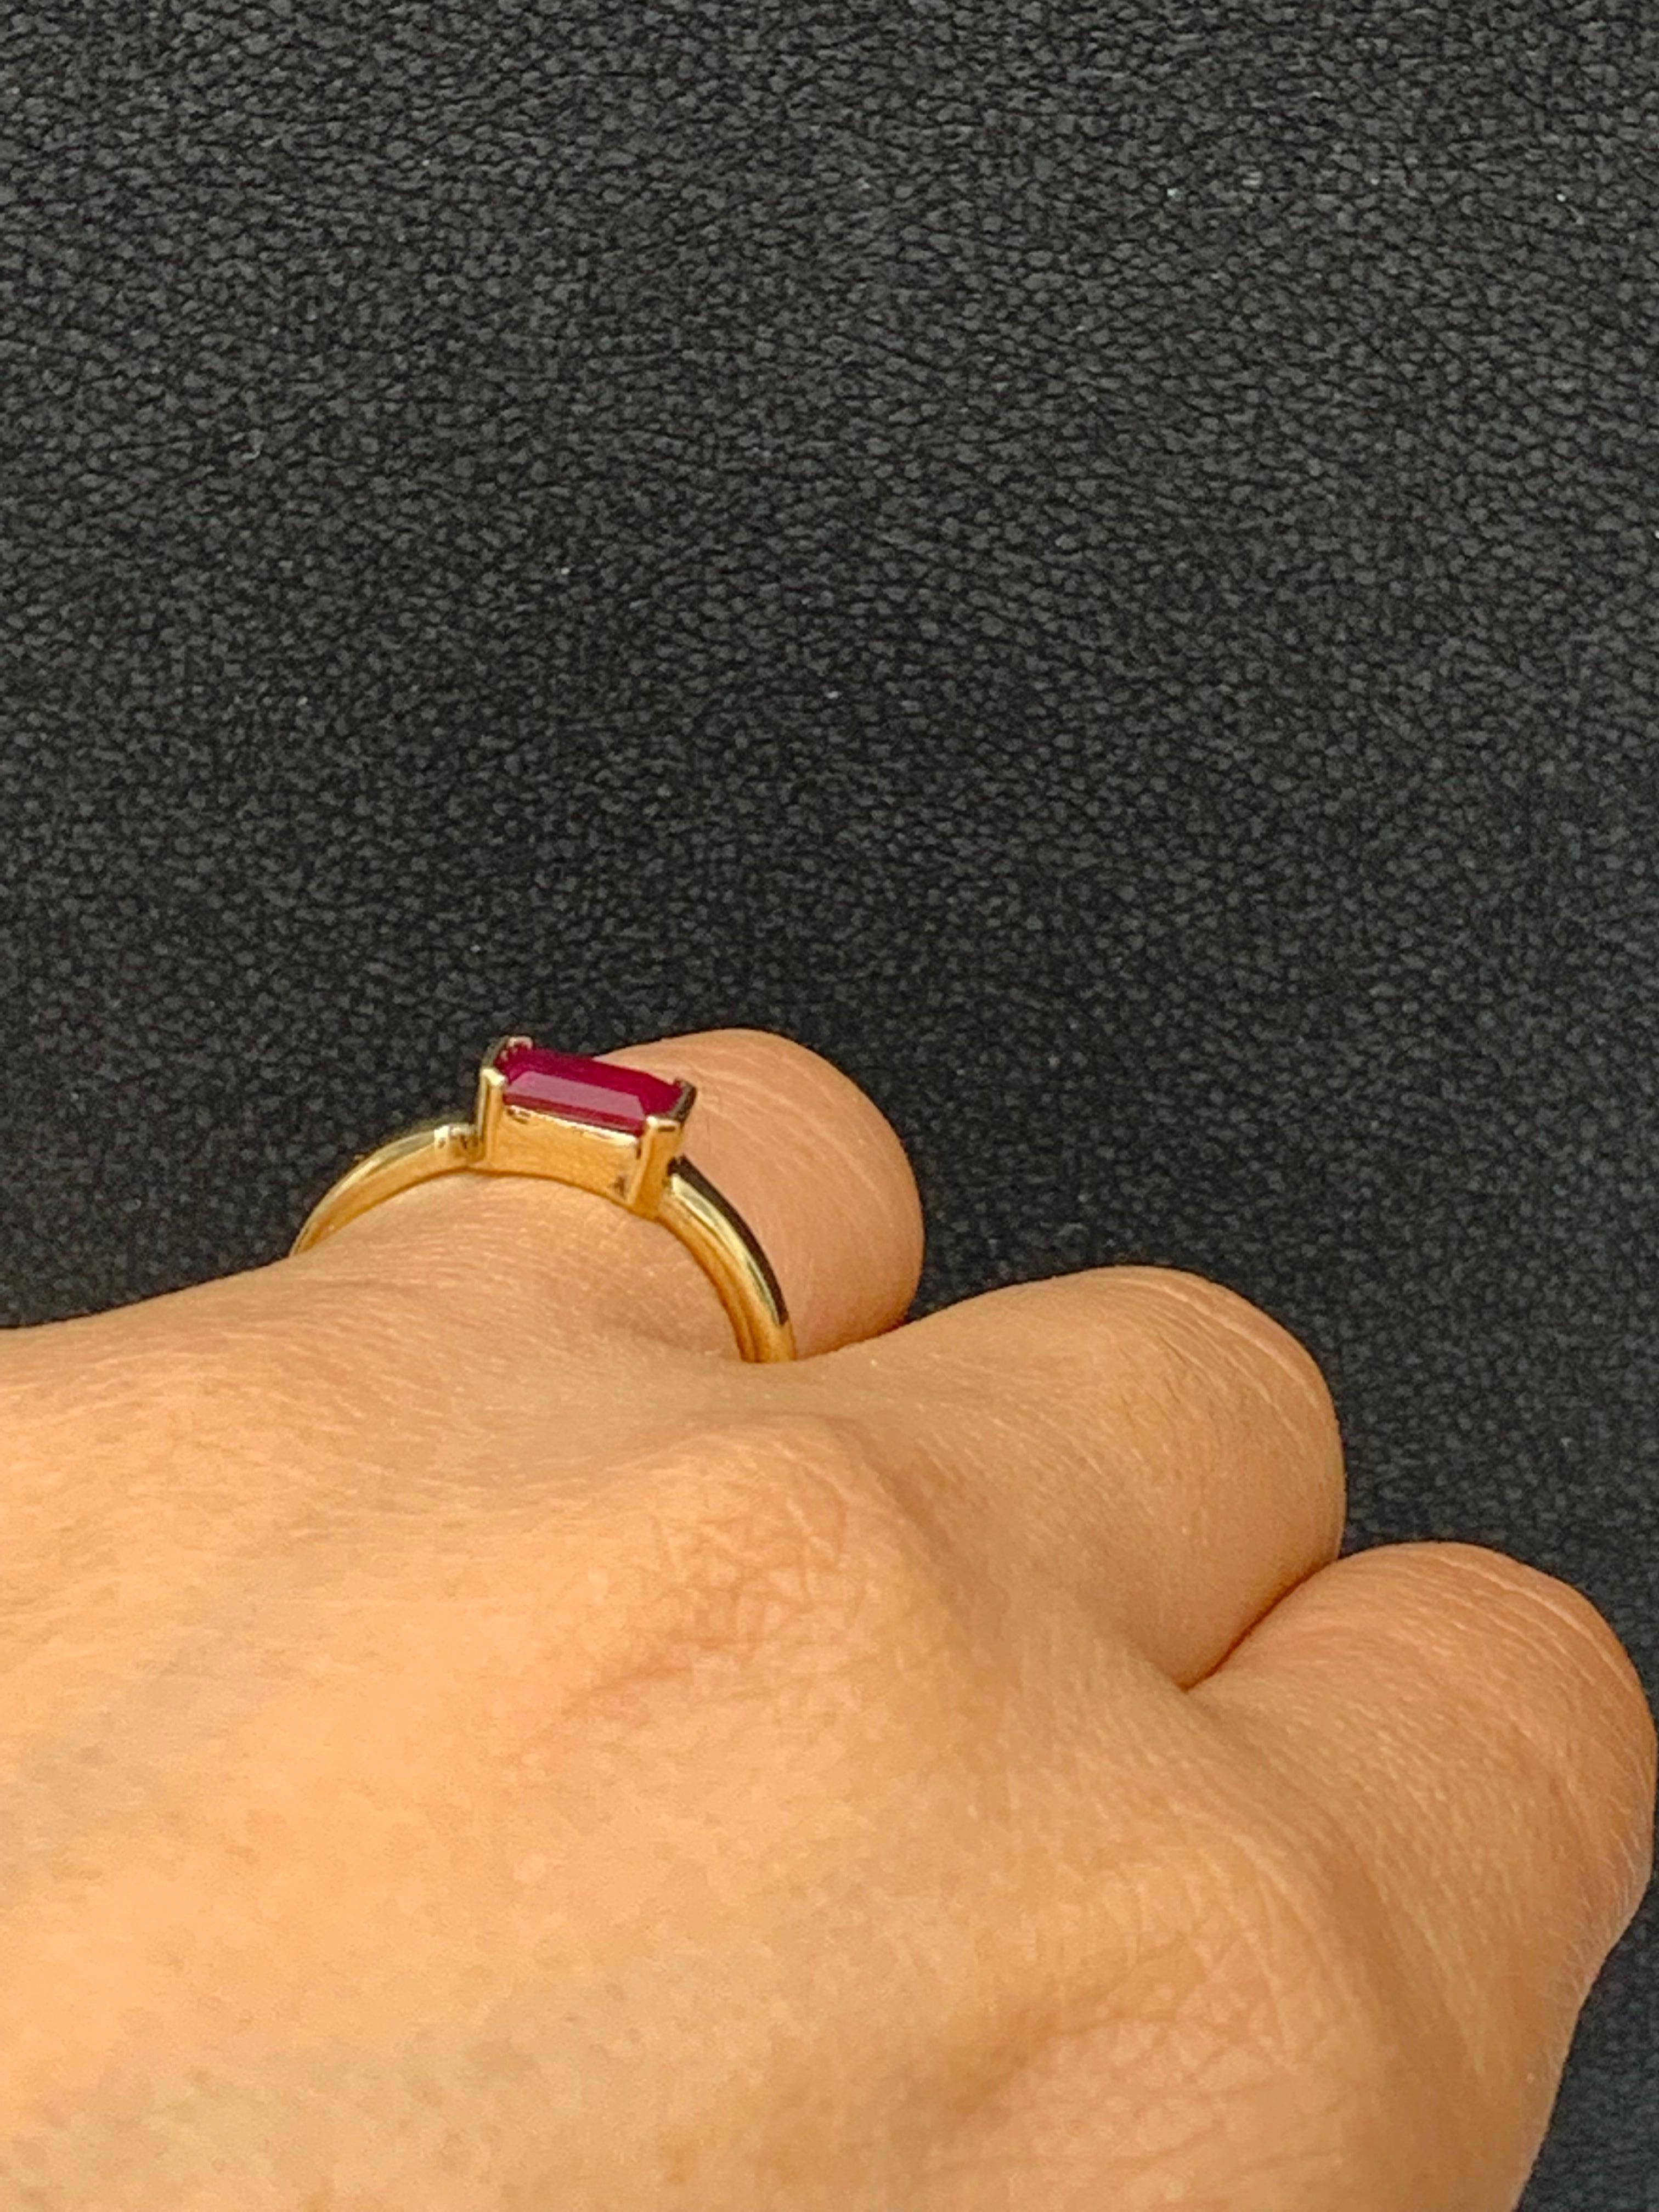 1.06 Carat Emerald Cut Ruby Band Ring in 14K Yellow Gold For Sale 1